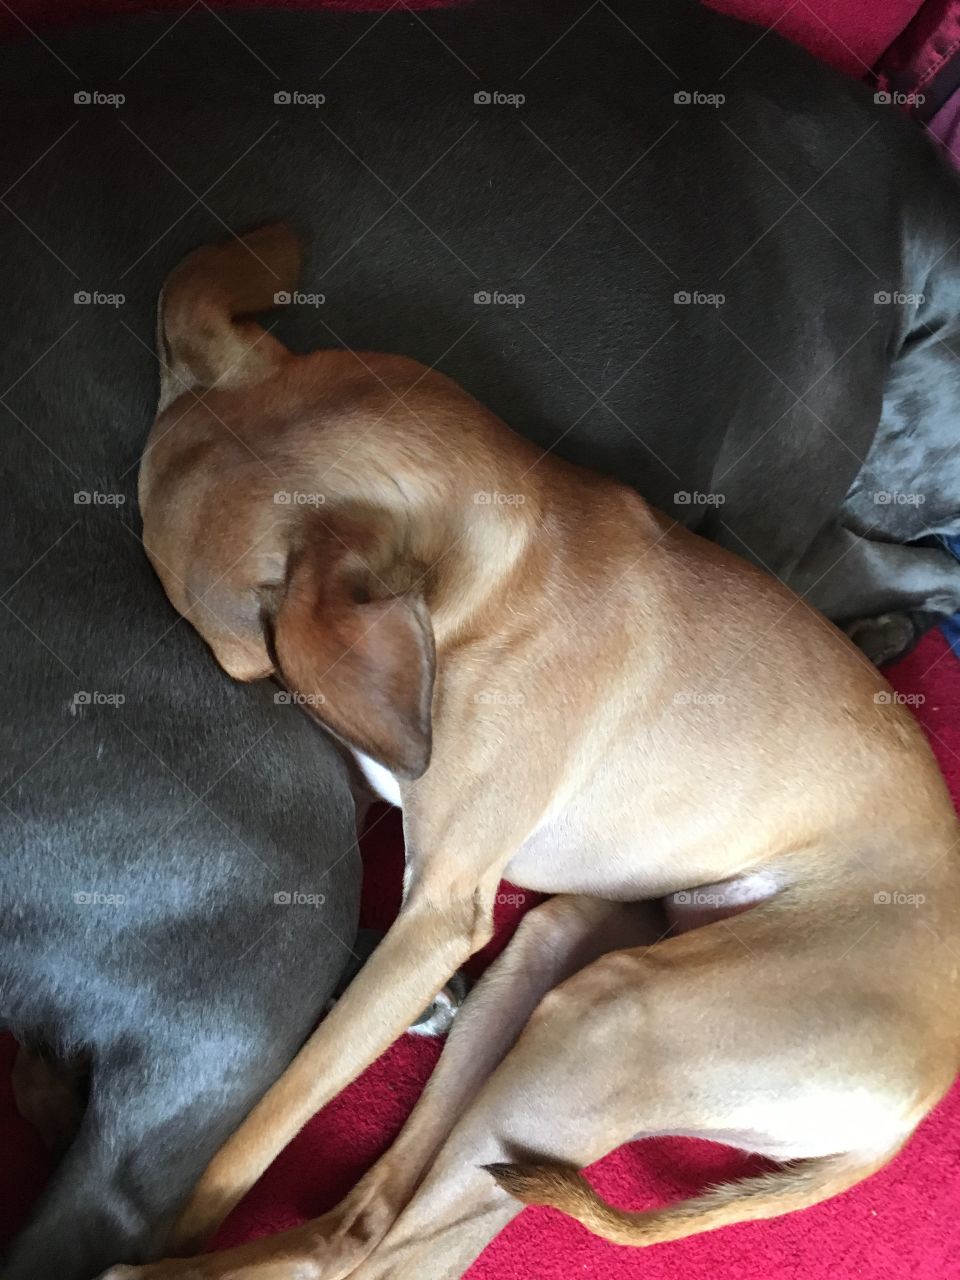 Amber the Italian greyhound puppy asleep snuggled up to Libby the whippet with her head buried 